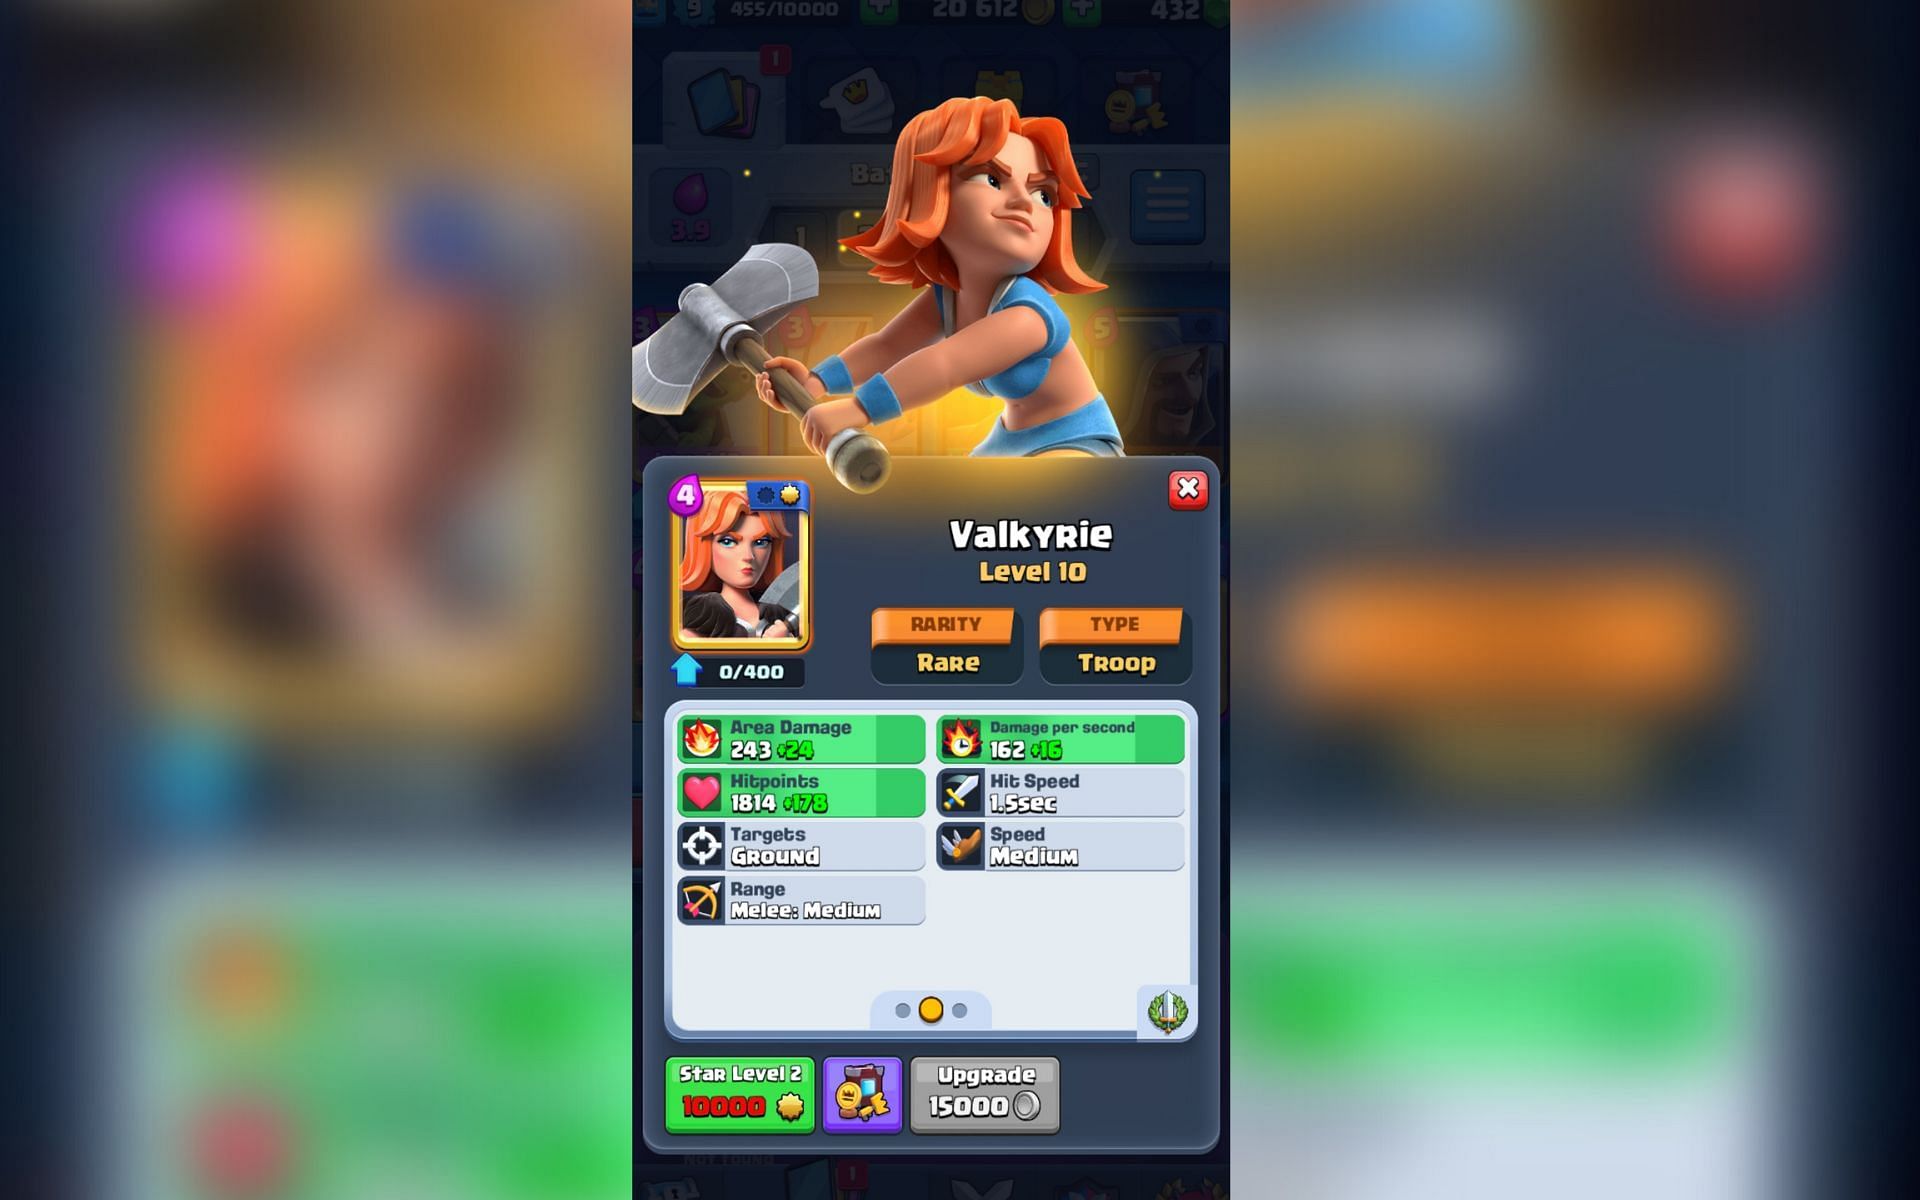 Which is the best Arena 3 deck in Clash Royale?